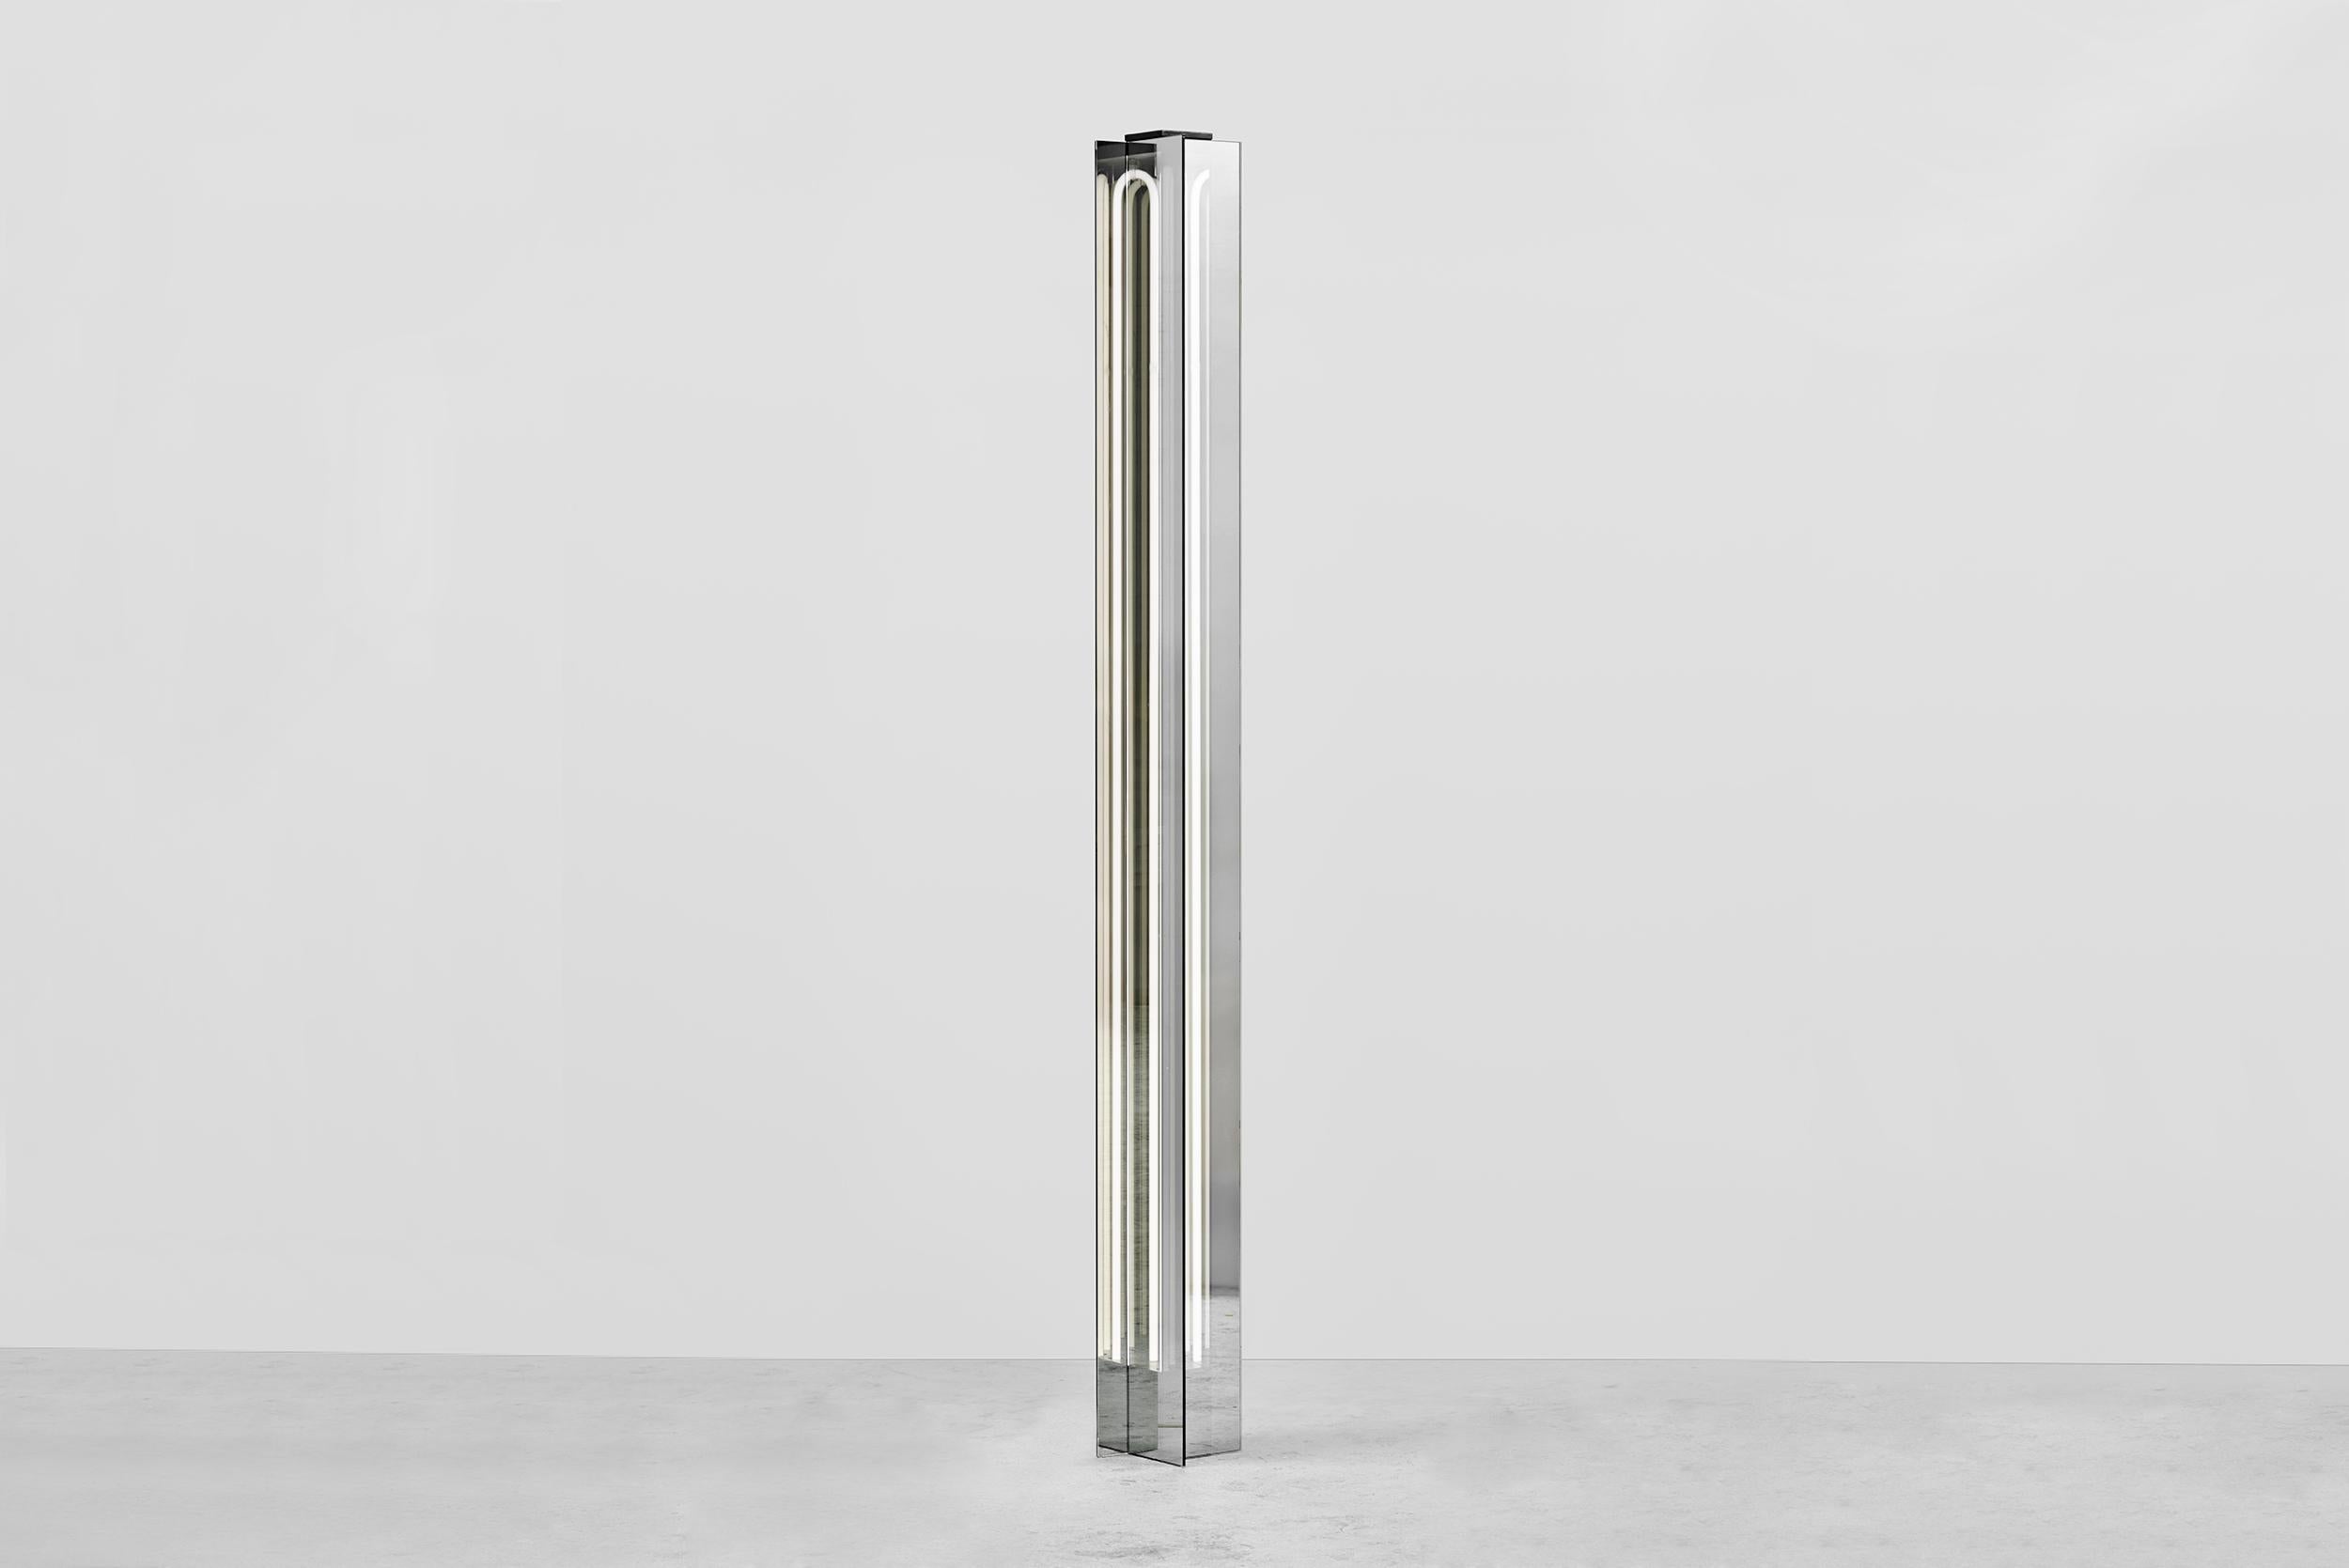 Sabine Marcelis Floor Lamp “Pillar” (Small) 
From the series “No Fear of Glass”
Manufactured by Sabine Marcelis
Produced in exclusive for Side Gallery
Rotterdam, The Netherlands 2019
Two way mirror, Glass neon lights, Neon